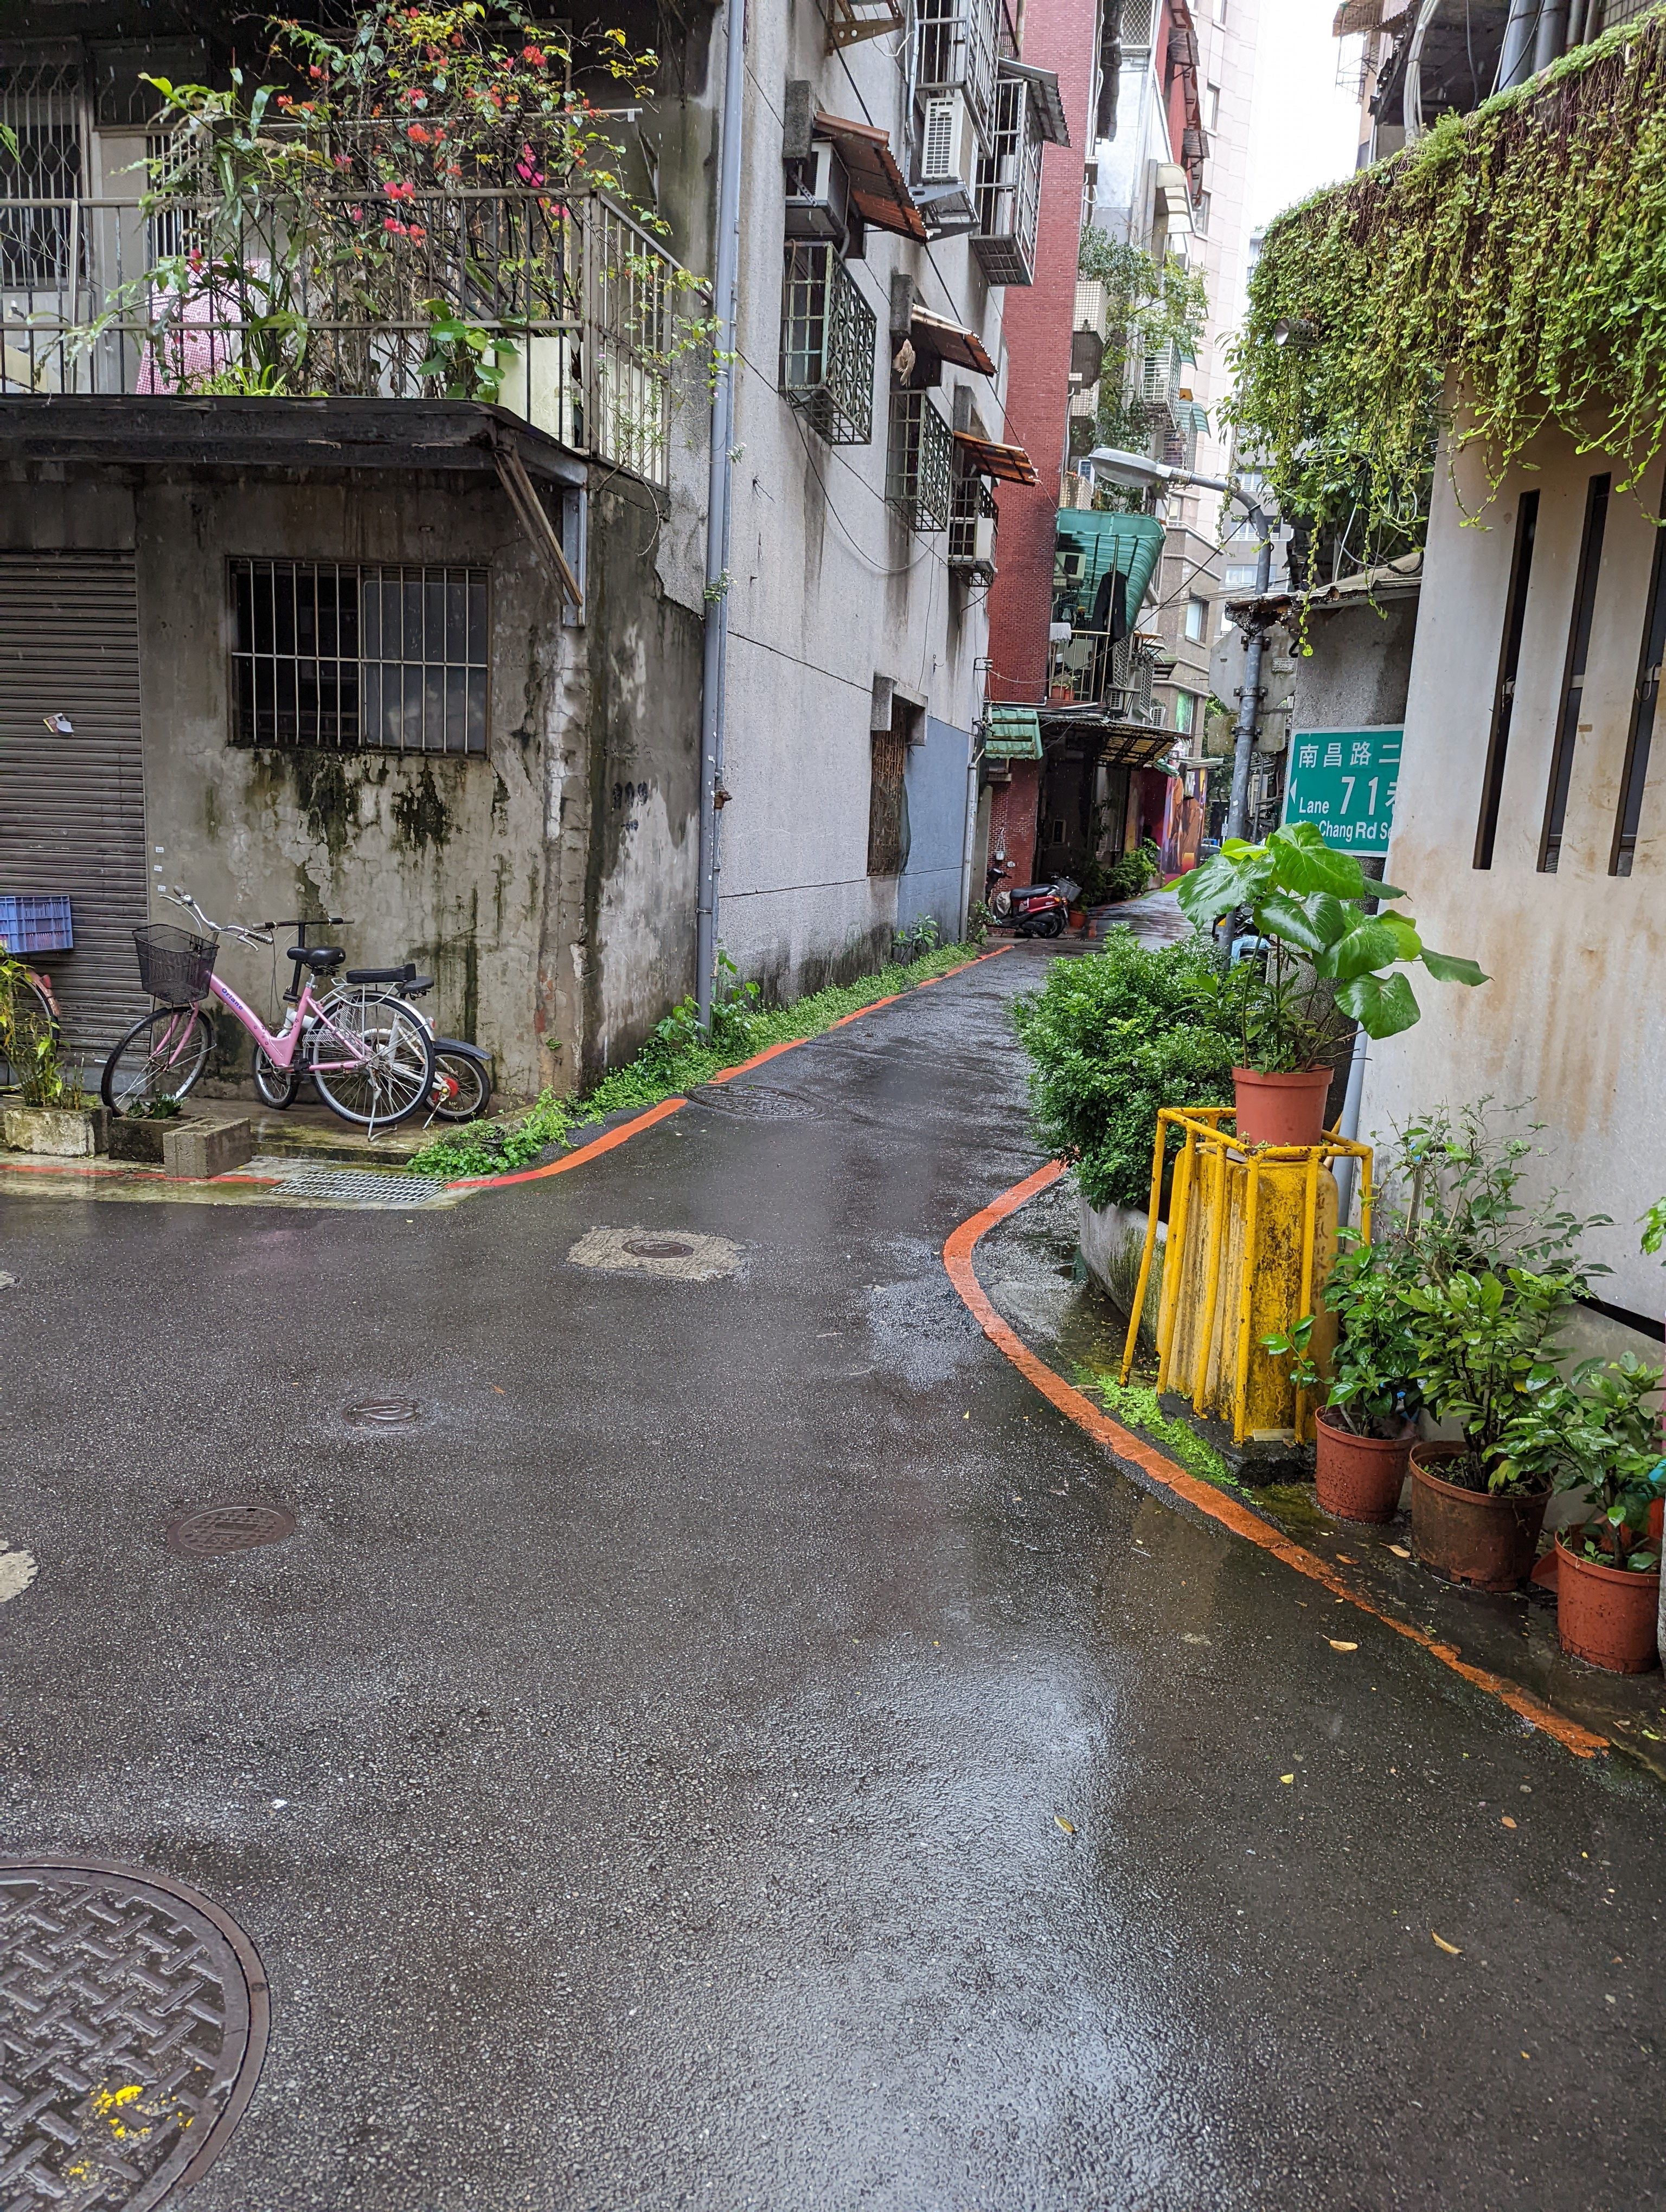 A small alley, with lots of plants and a pink bicycle.